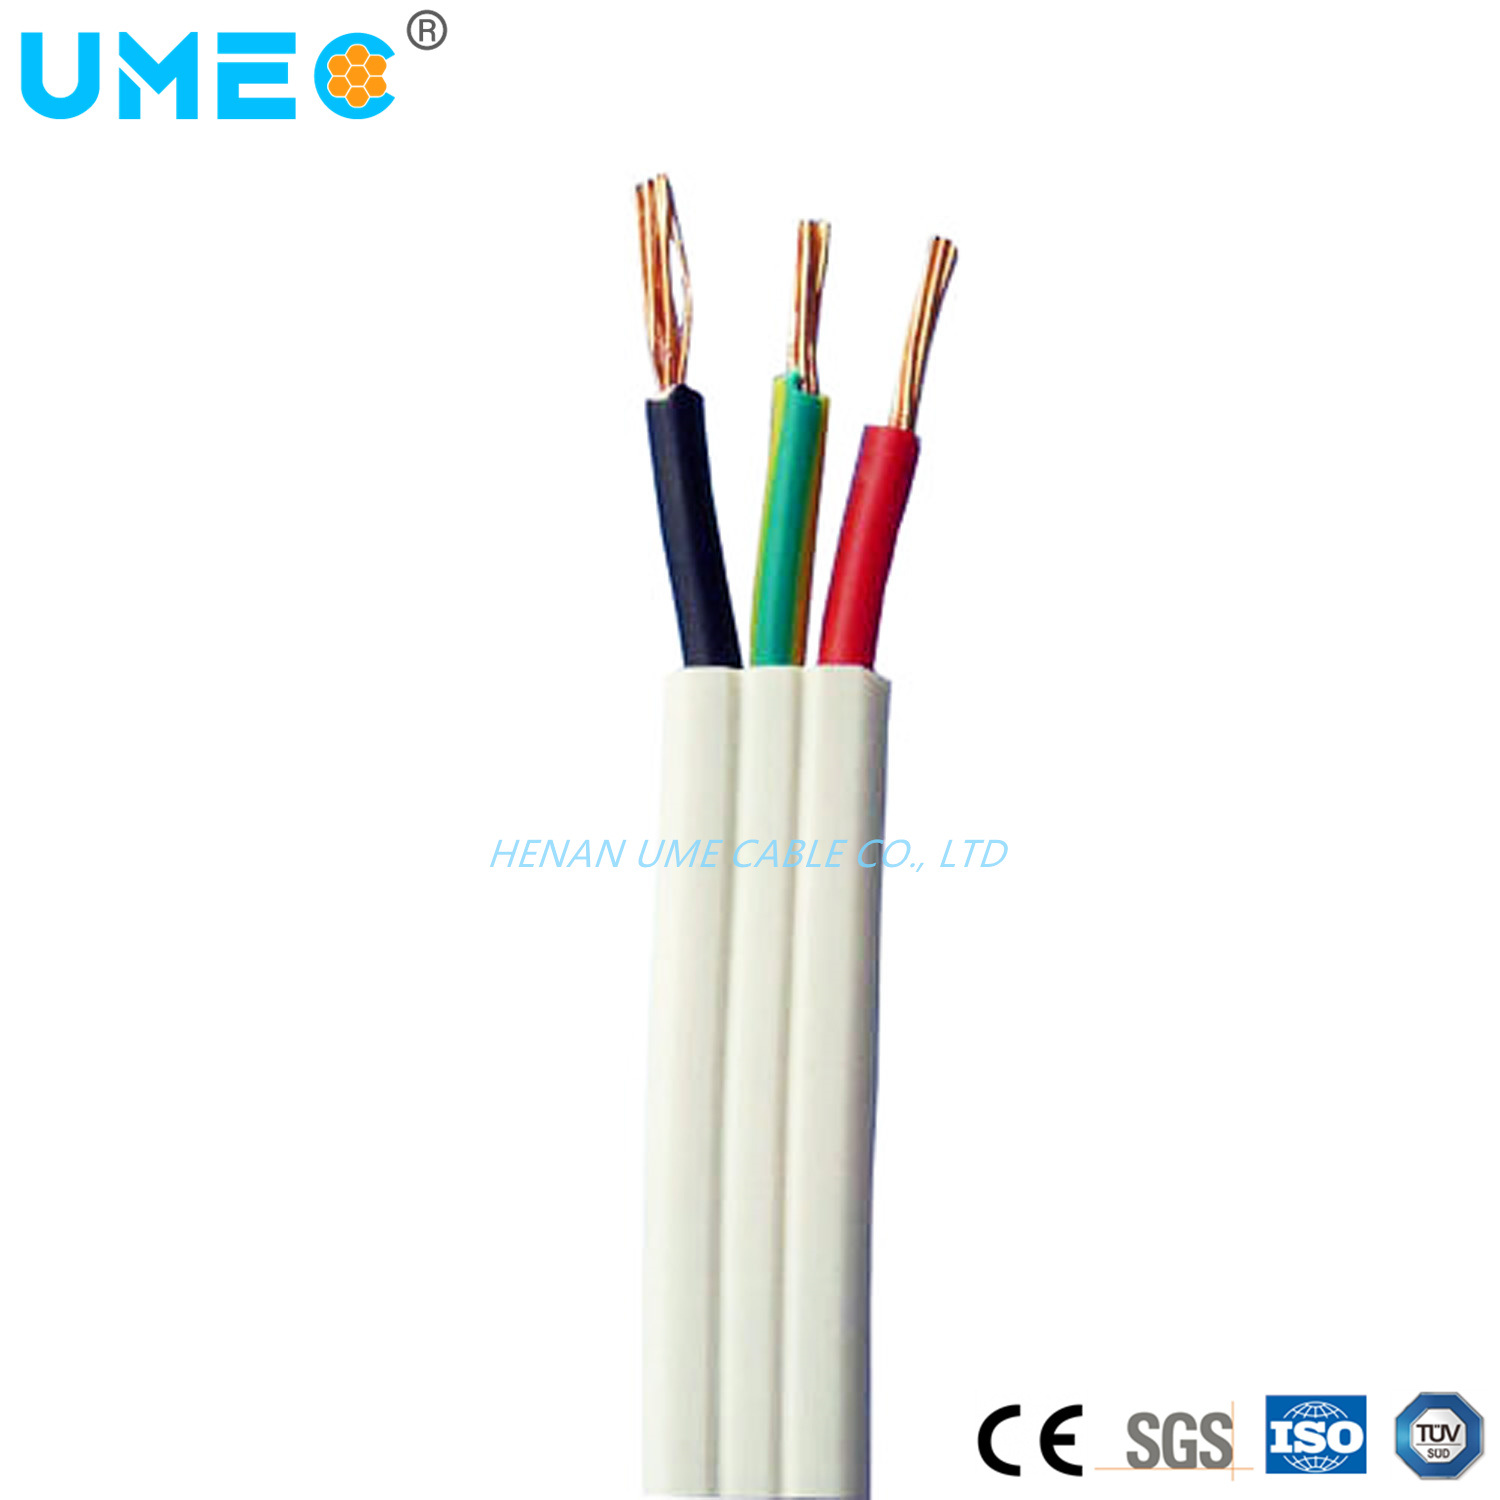 BS ASTM Standard Domestic3 Core Cable 1.5mm 2.5mm 6mm PVC Insulated Twin & Earth TPS Flat Cable BVVB Blvvb